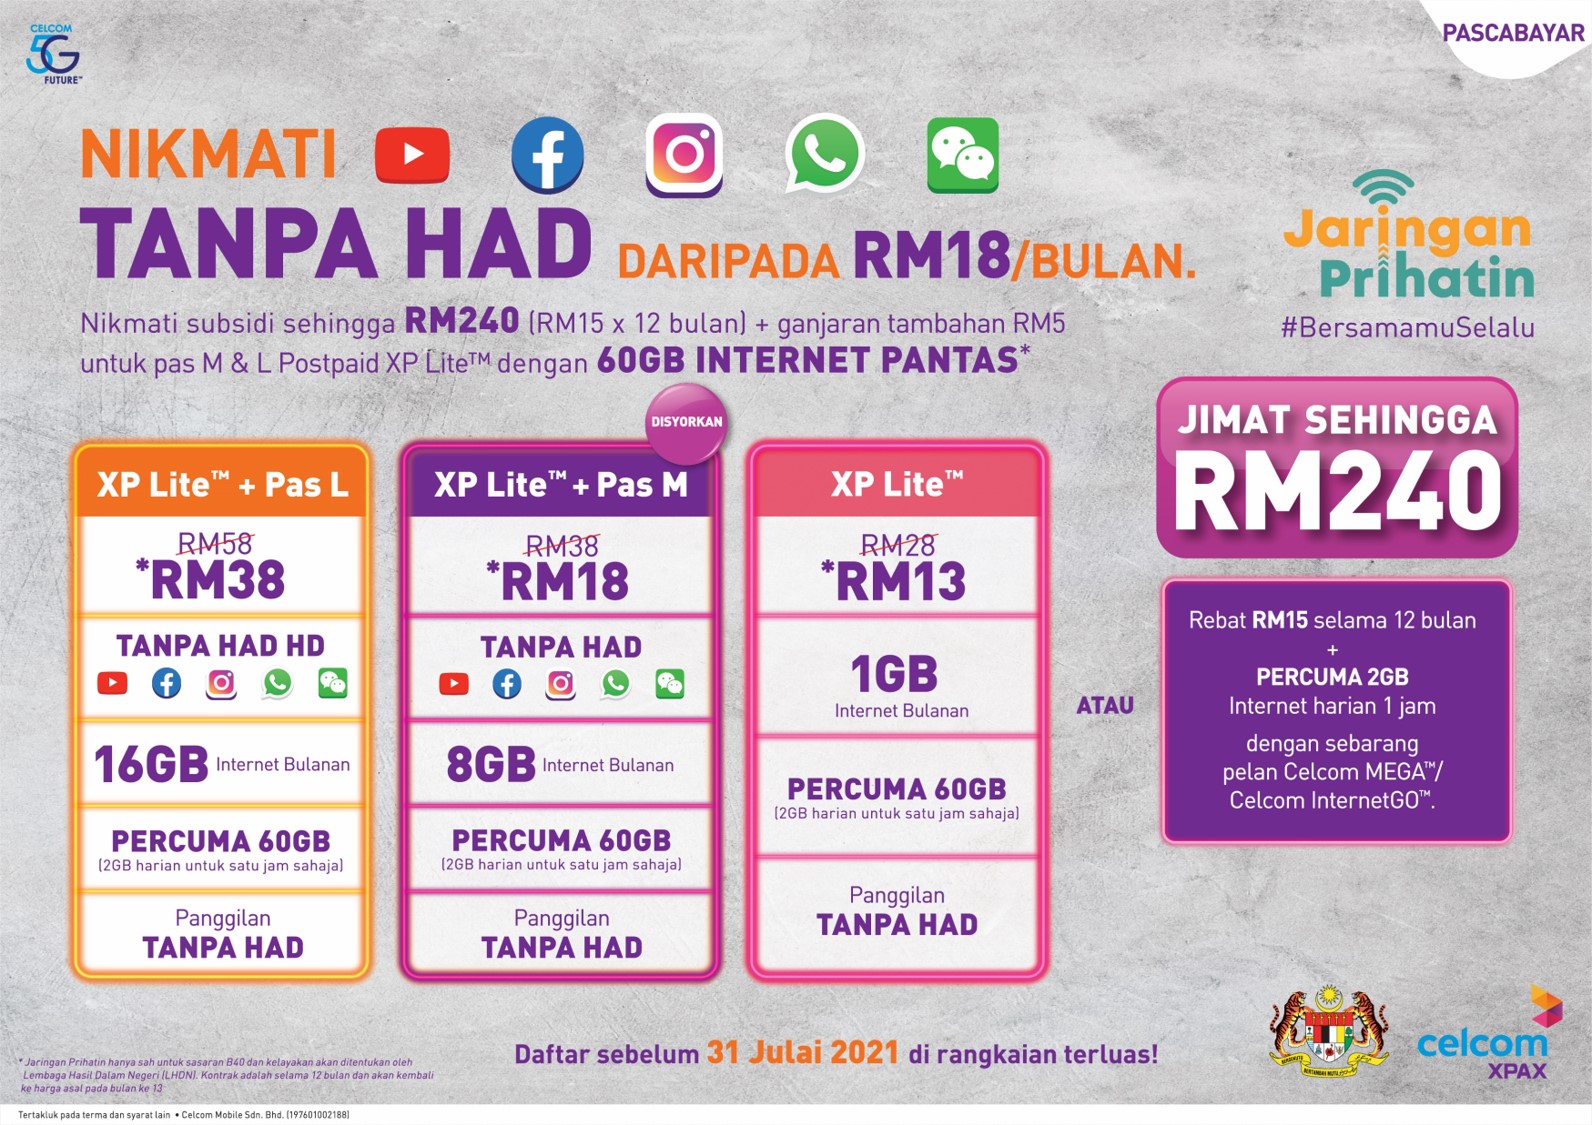 Celcom’s offers free devices, unlimited internet to B40 customers